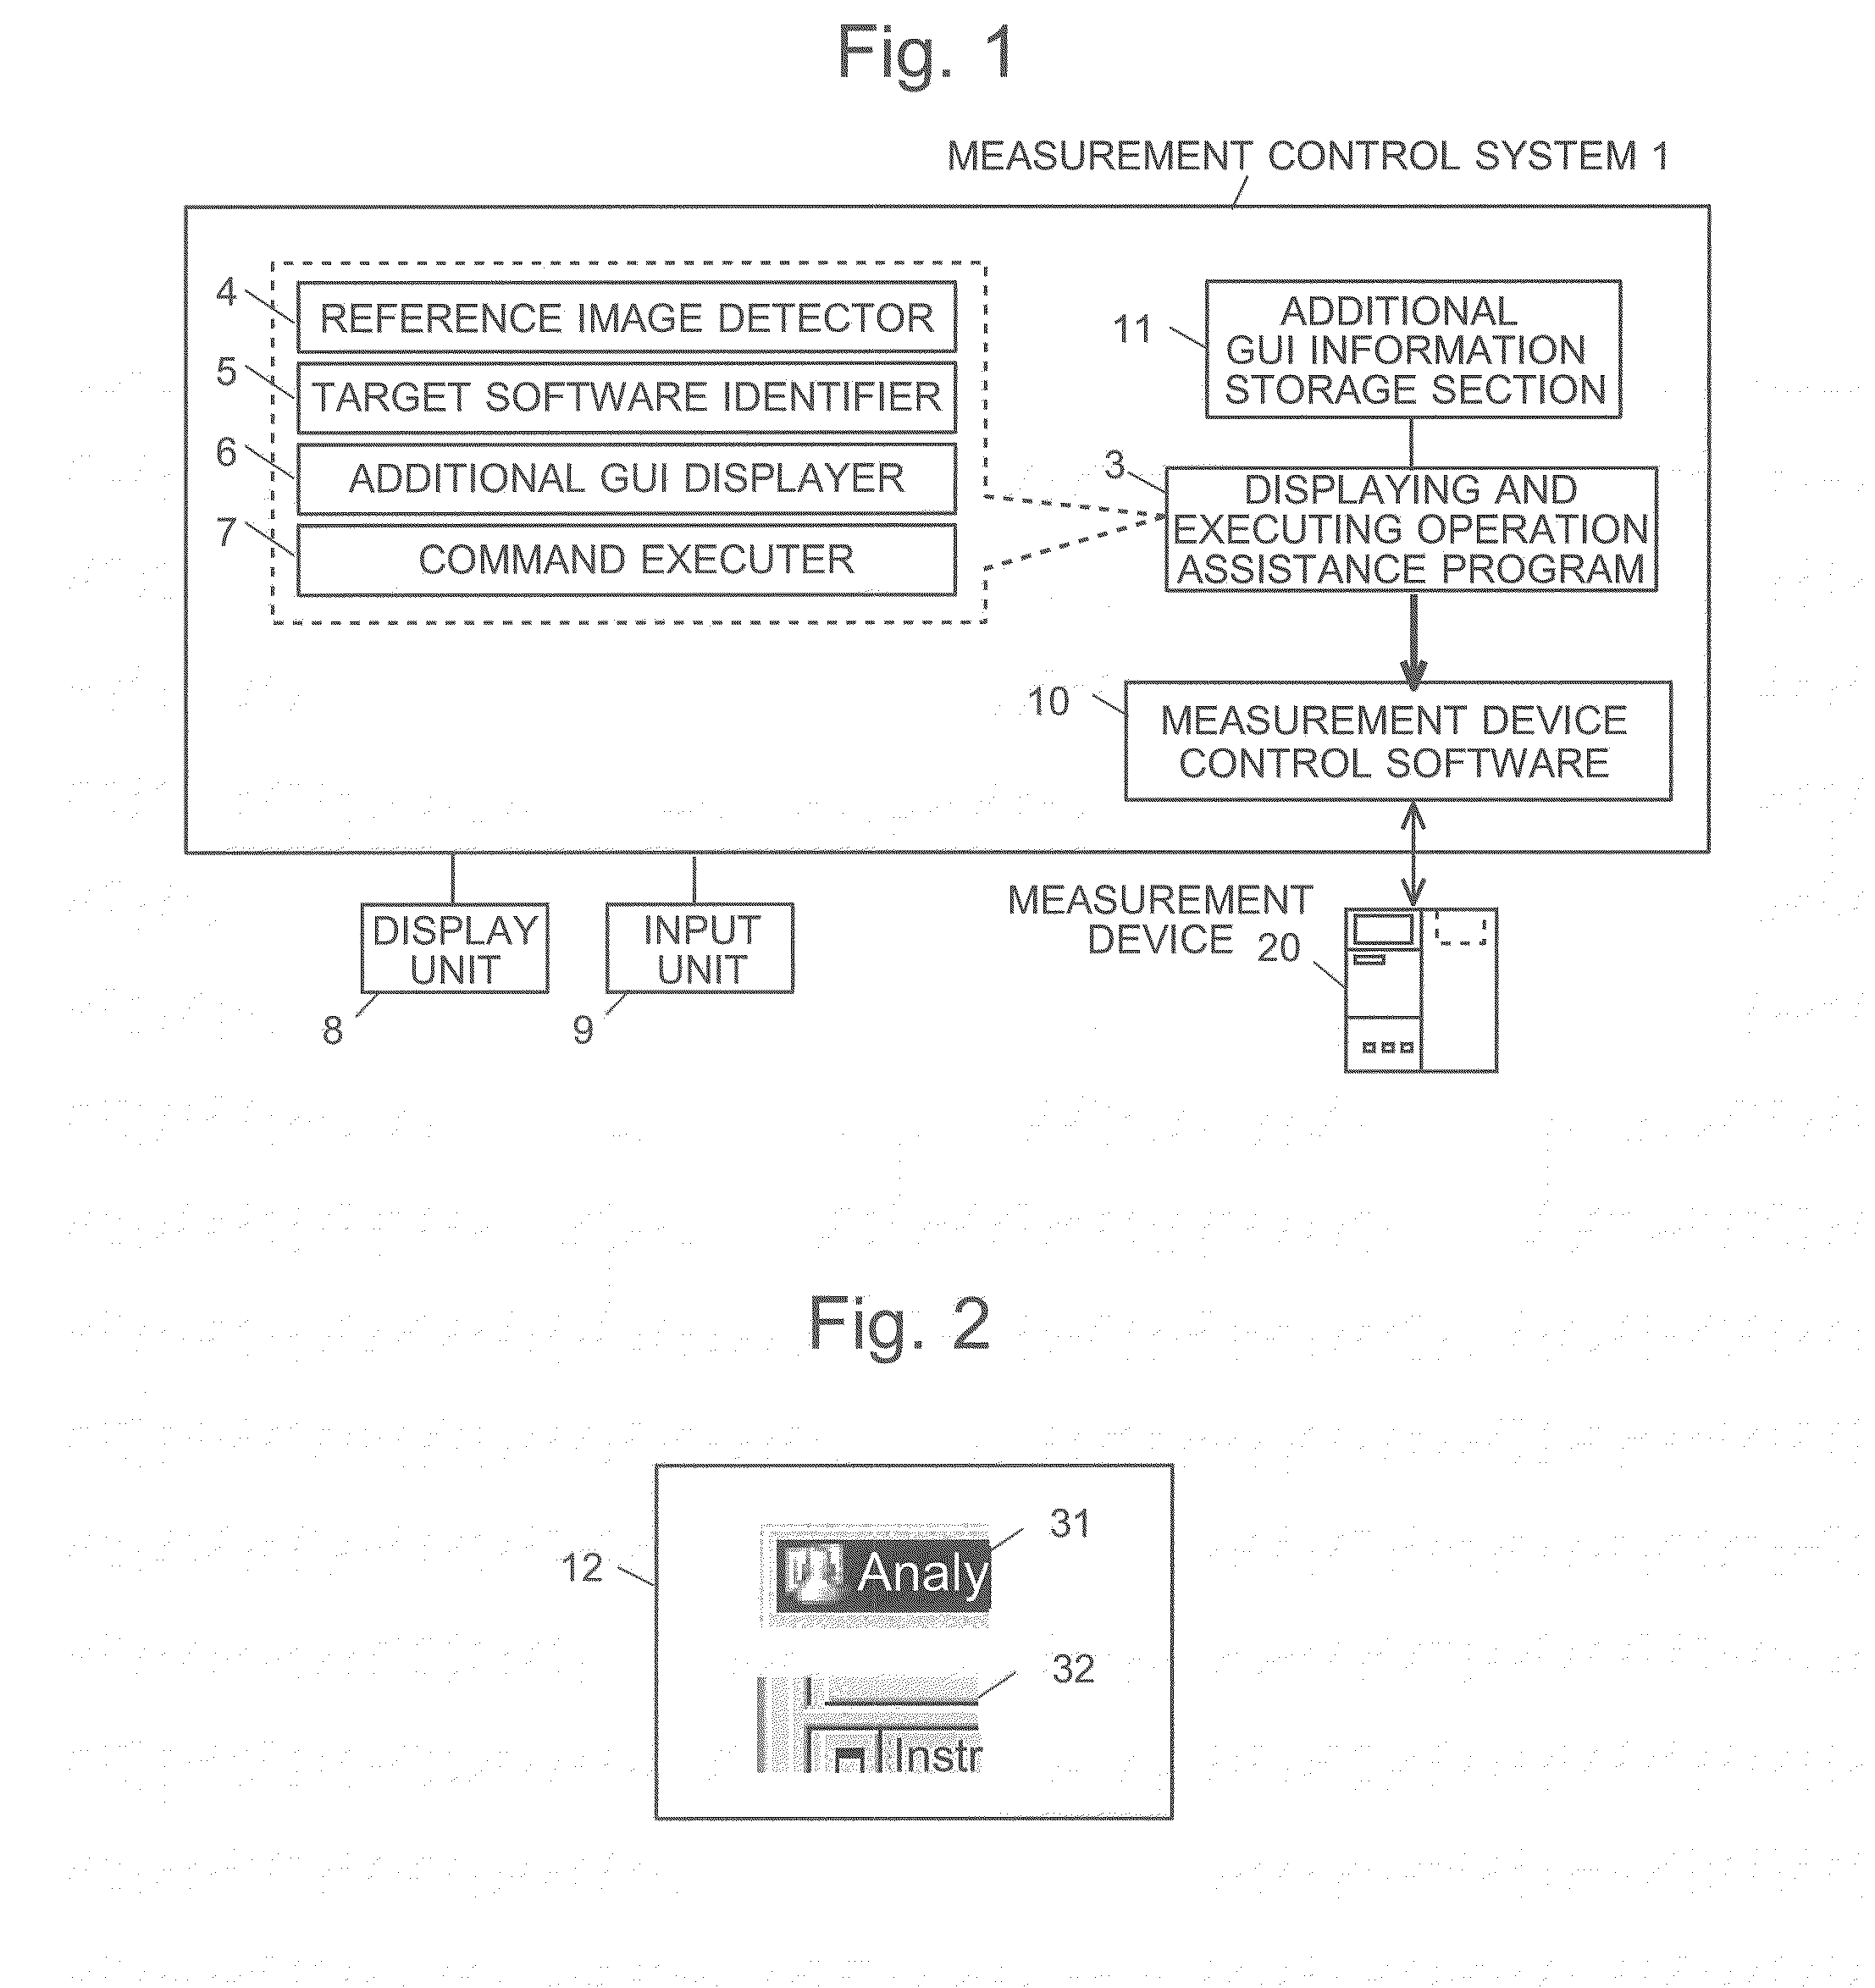 Displaying and executing operation assistance program